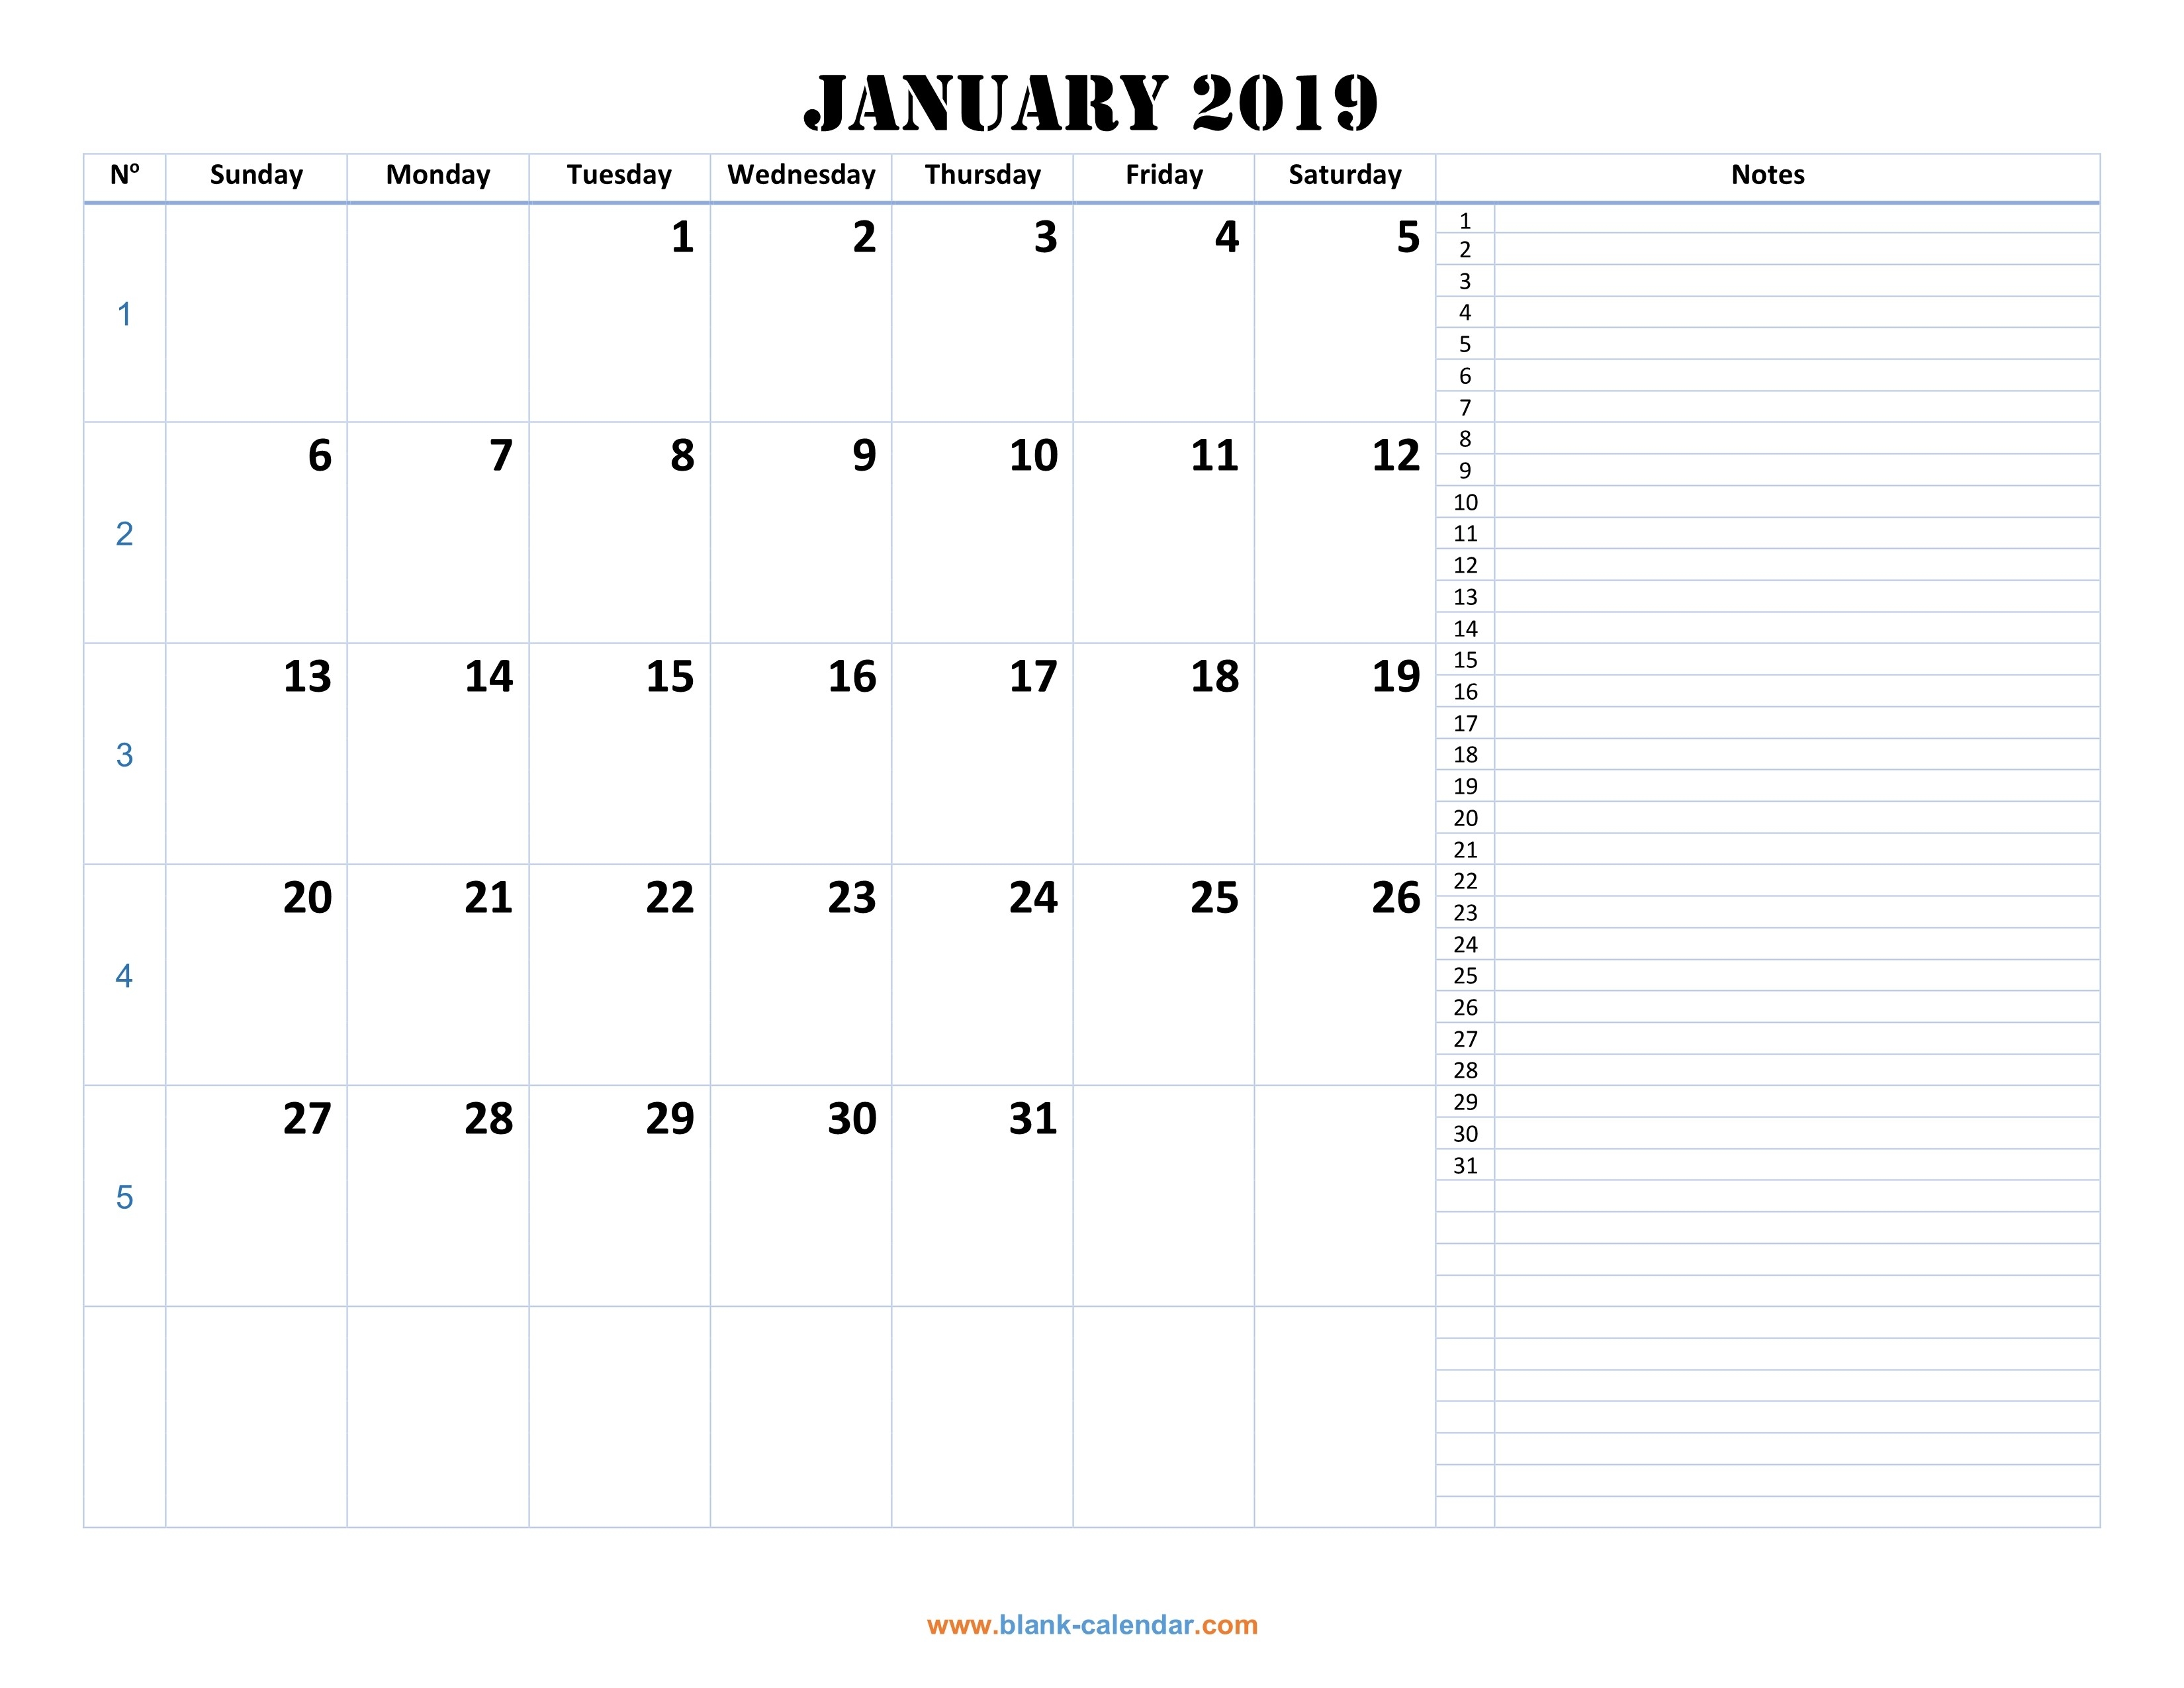 Monthly Calendar 2019 | Free Download, Editable And Printable-Monthly Calendar That Can Be Edited